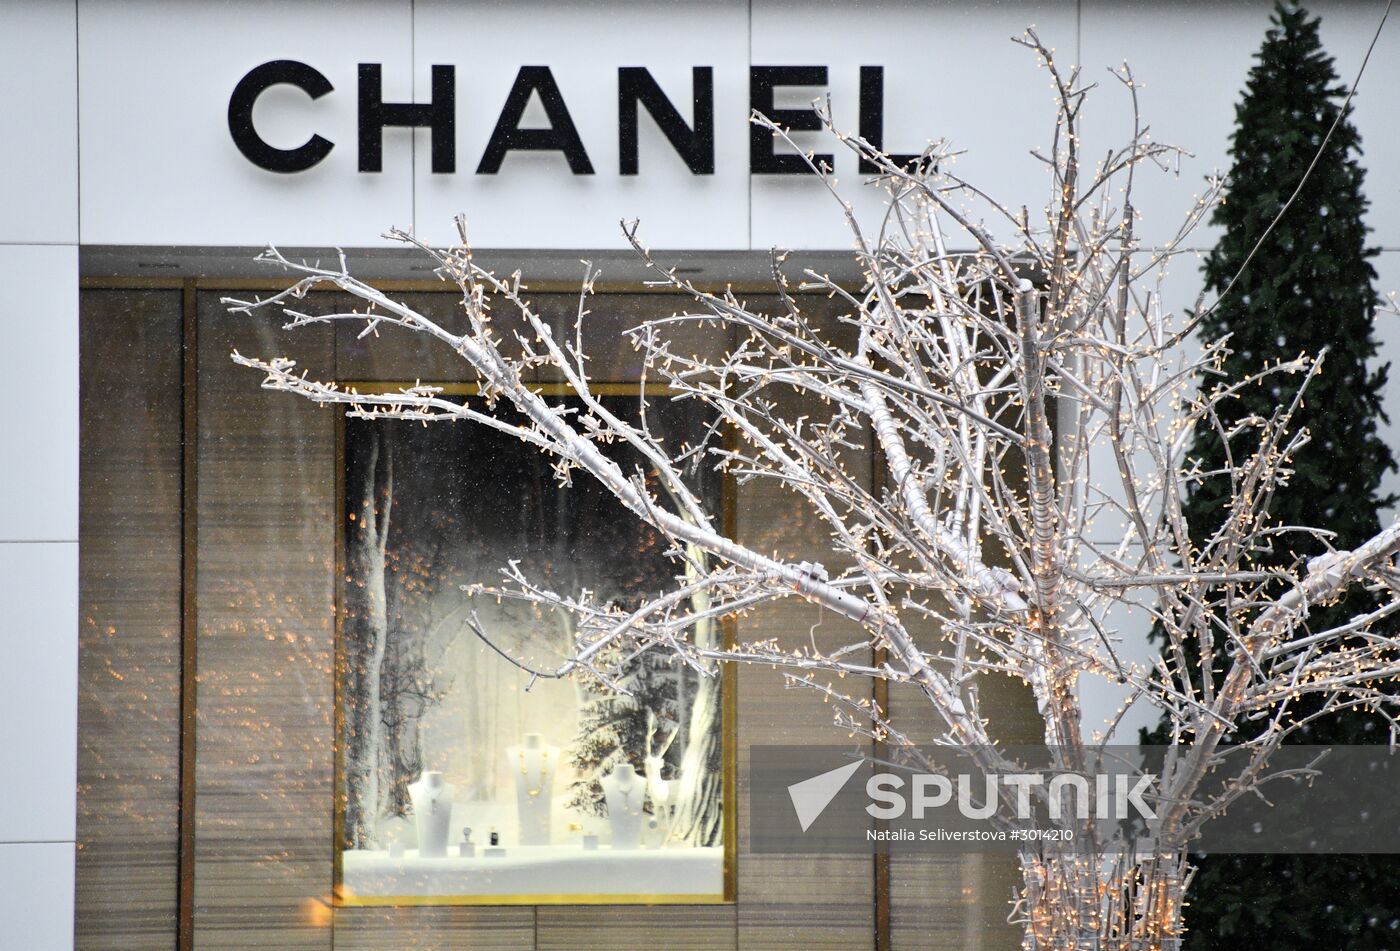 A Chanel store